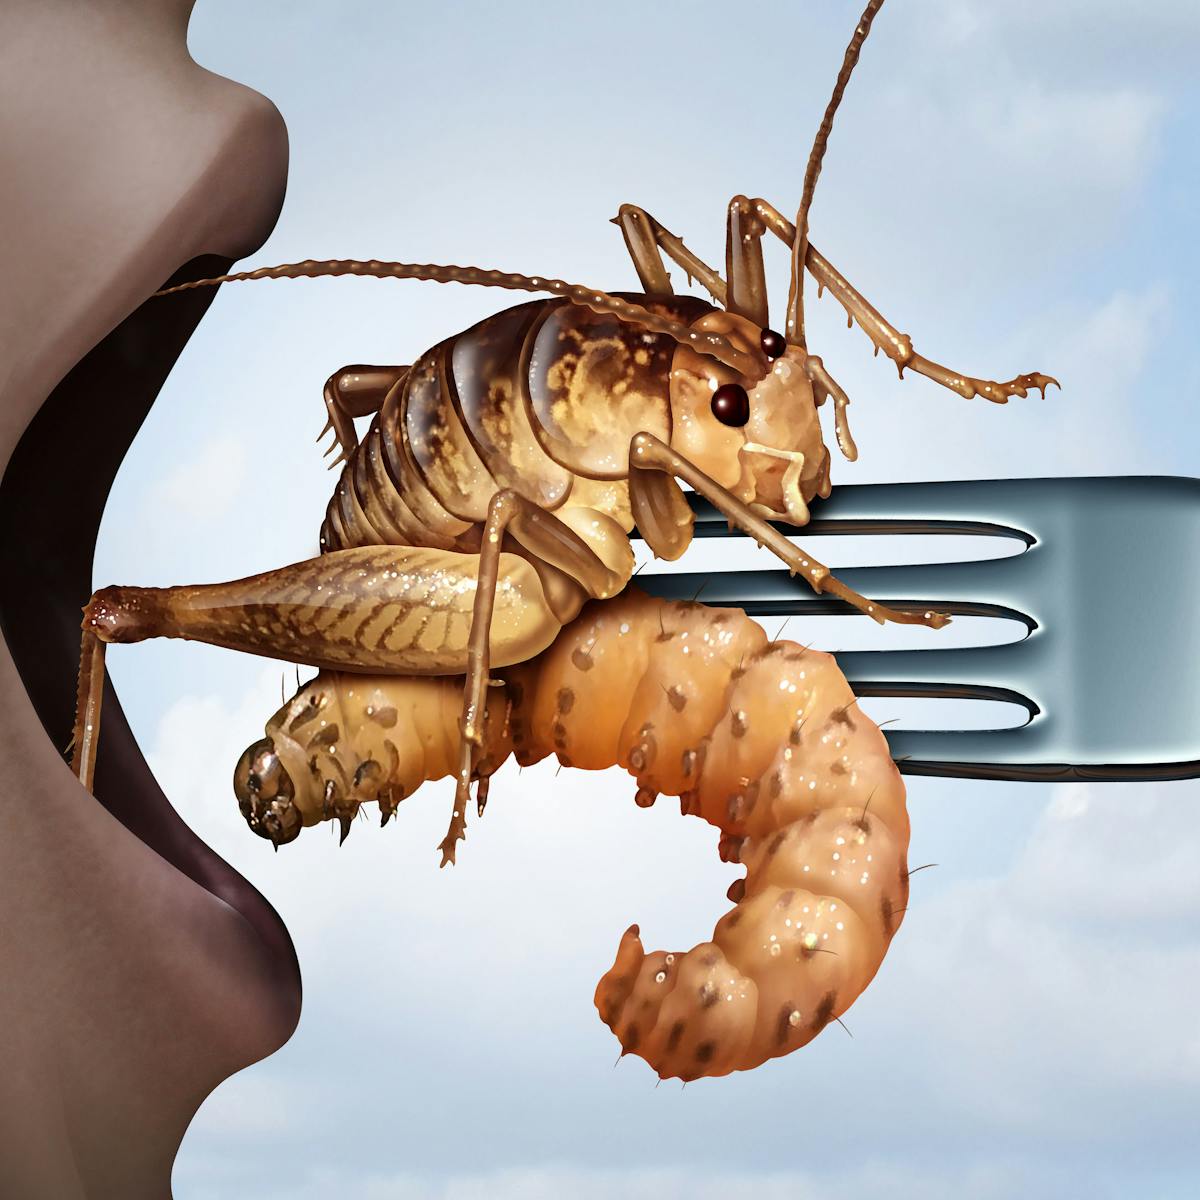 Are kids ready to eat insects?